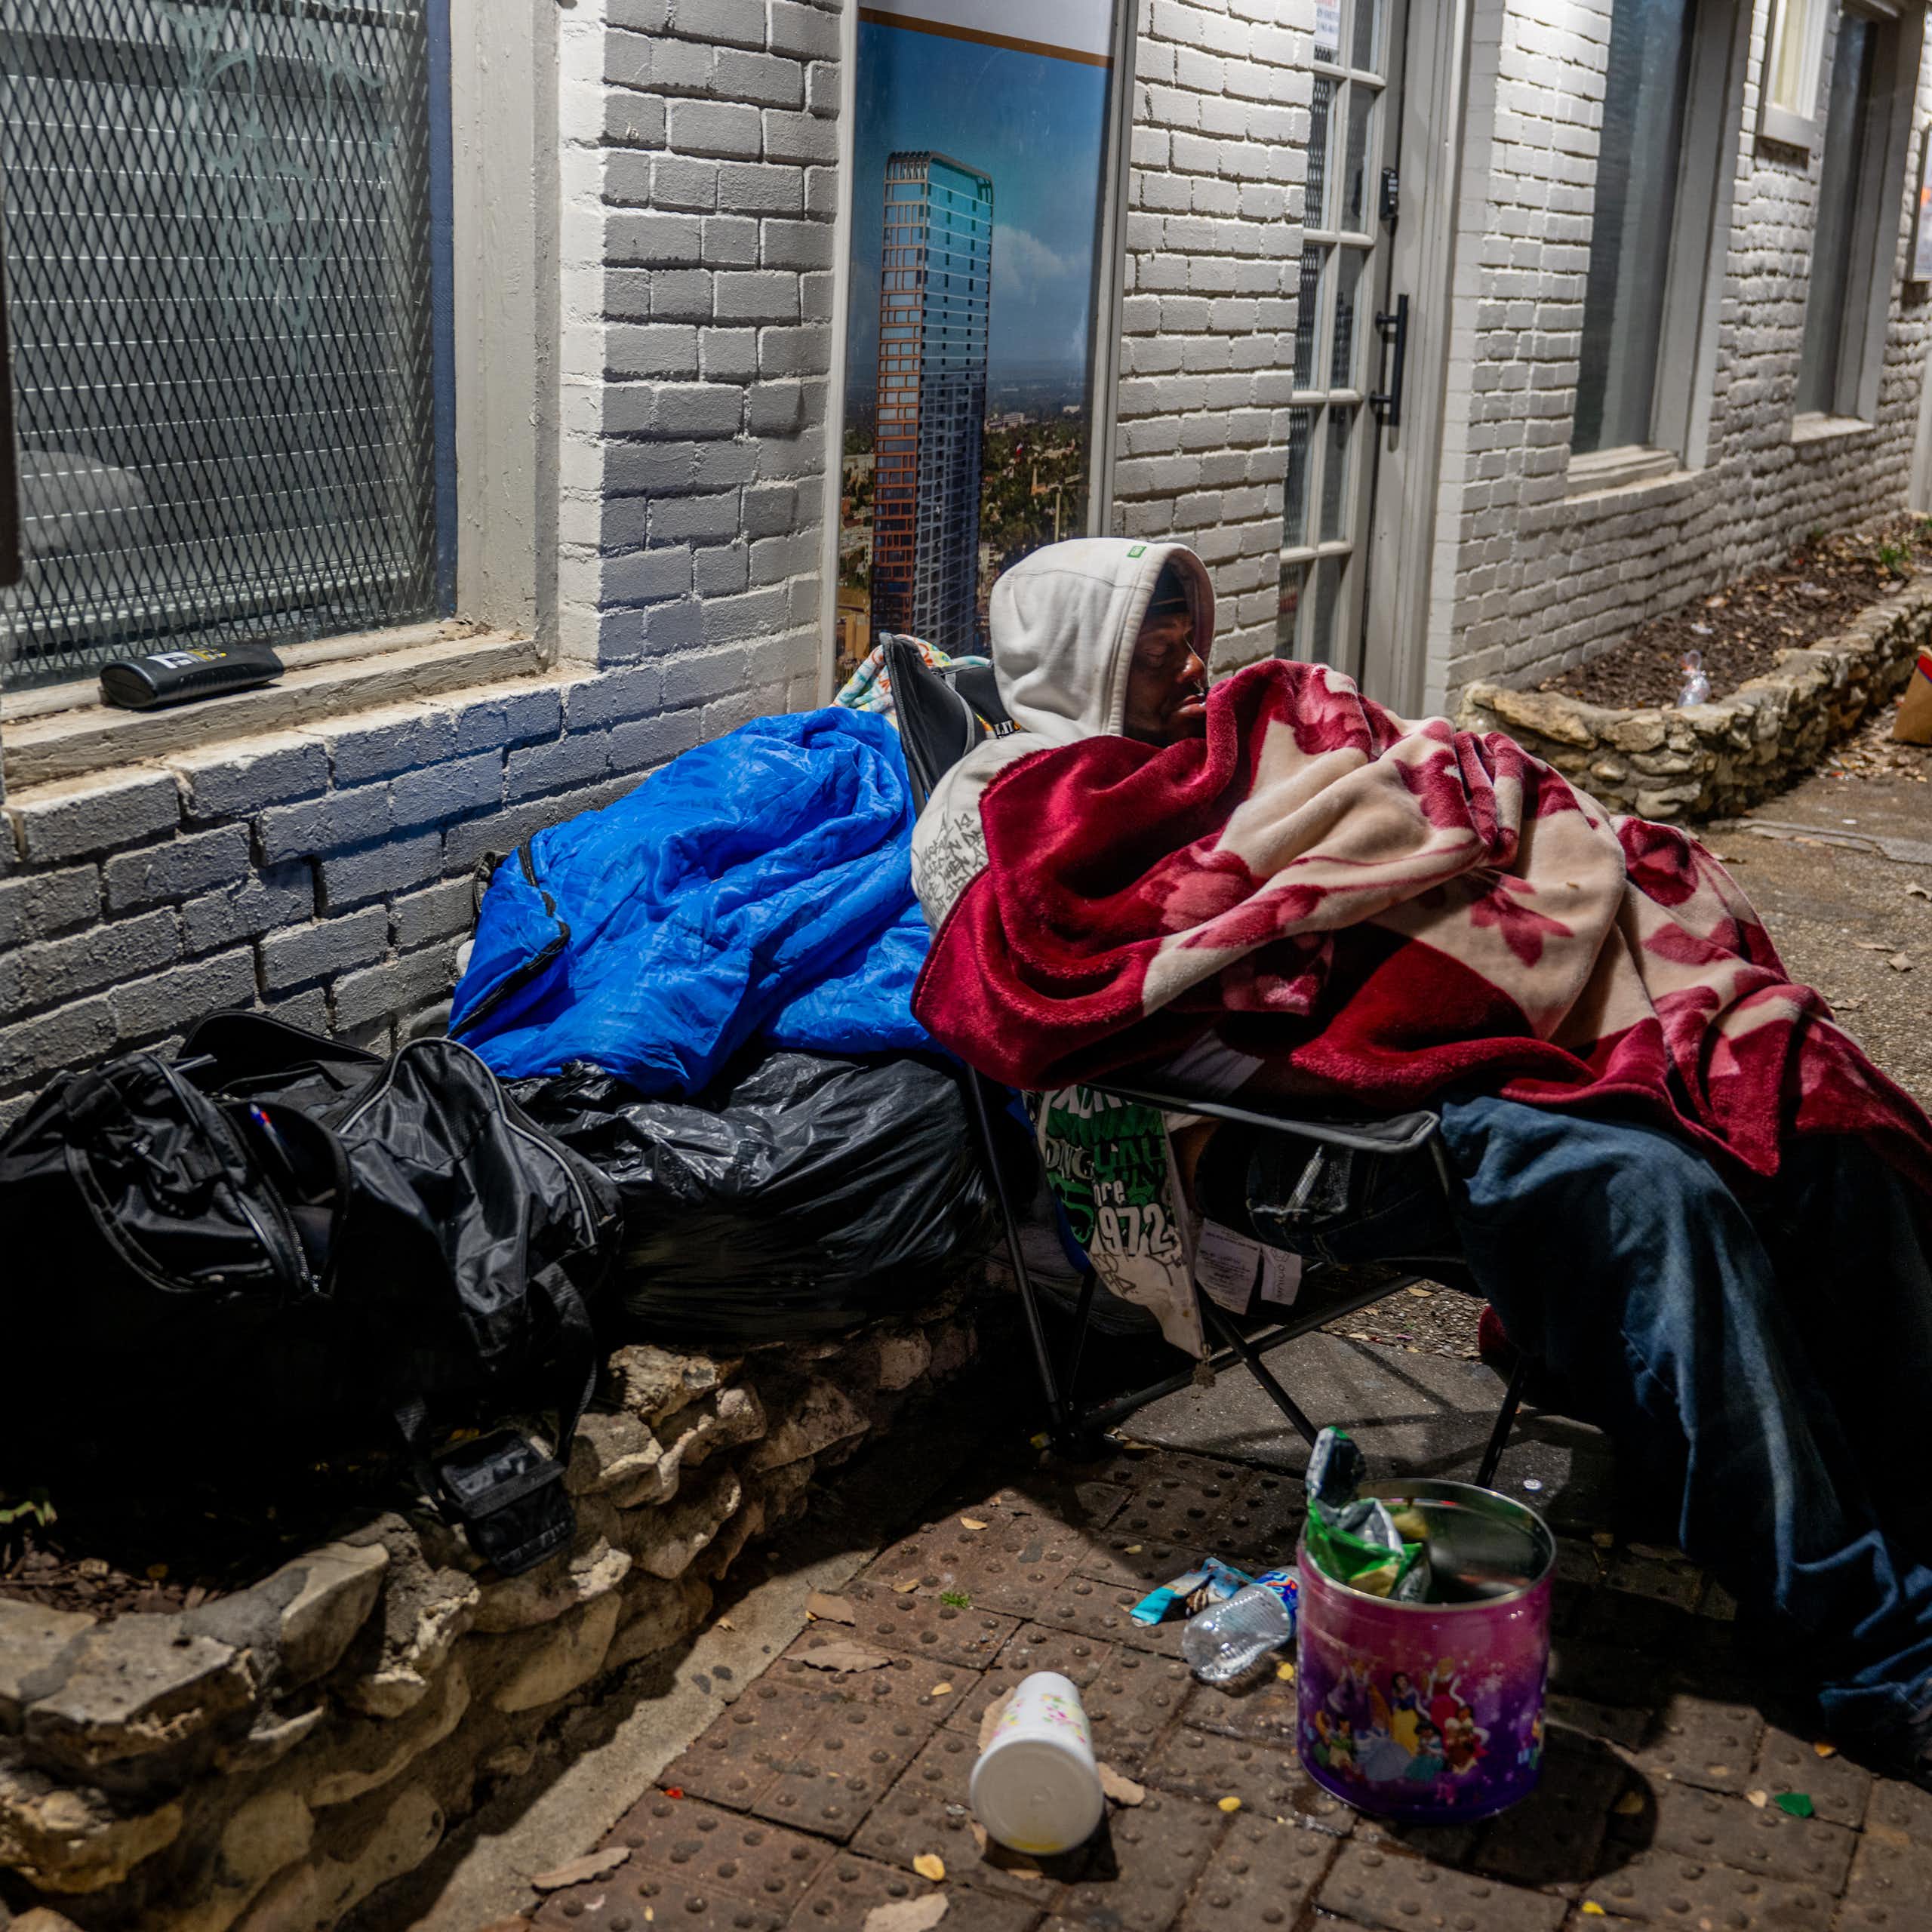 A man wrapped in blankets sits in a chair on a sidewalk near plastic bags and trash.